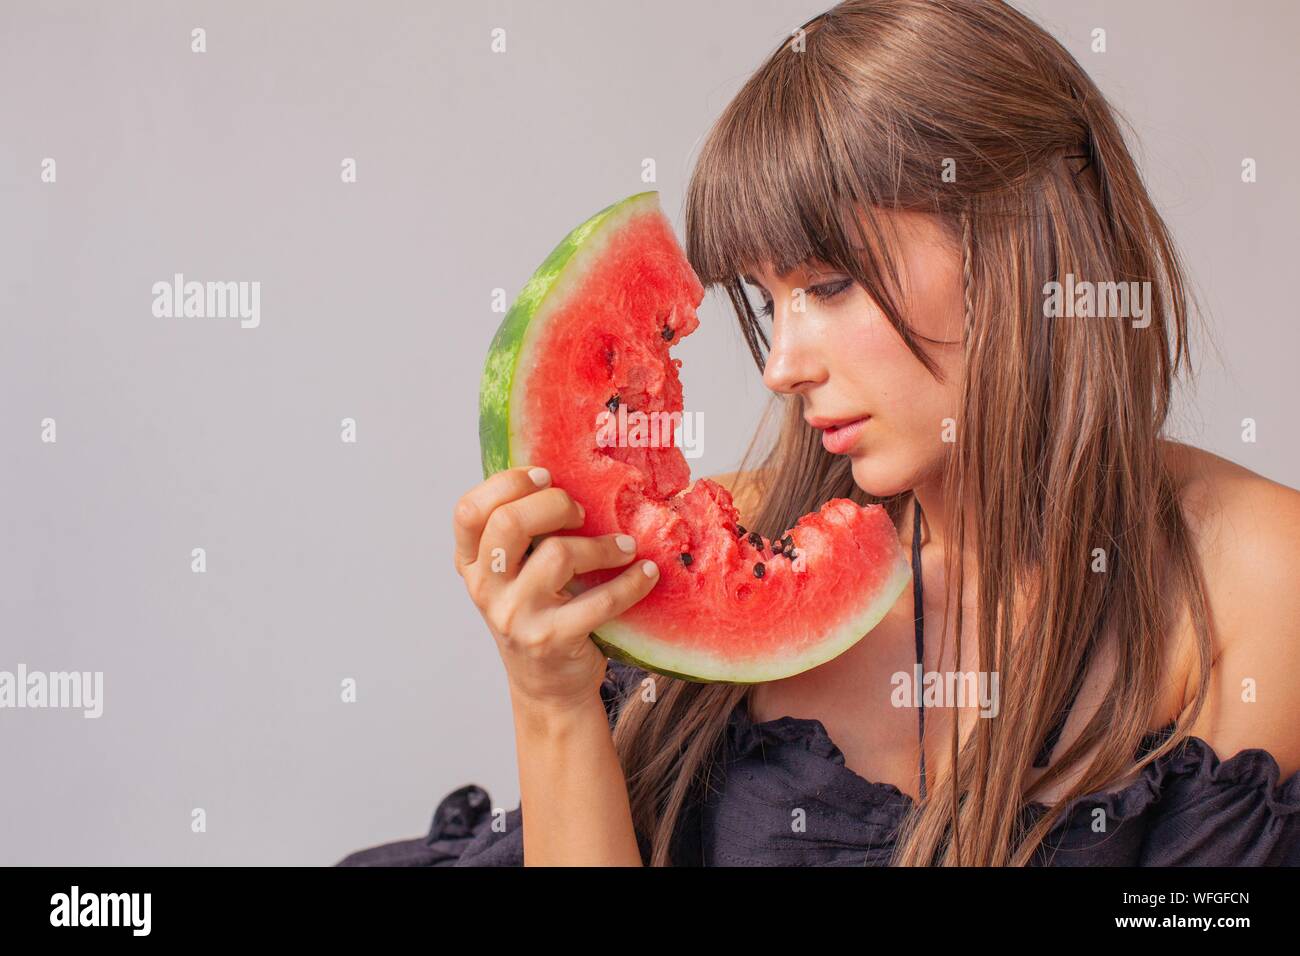 Woman looking at a slice of watermelon Stock Photo